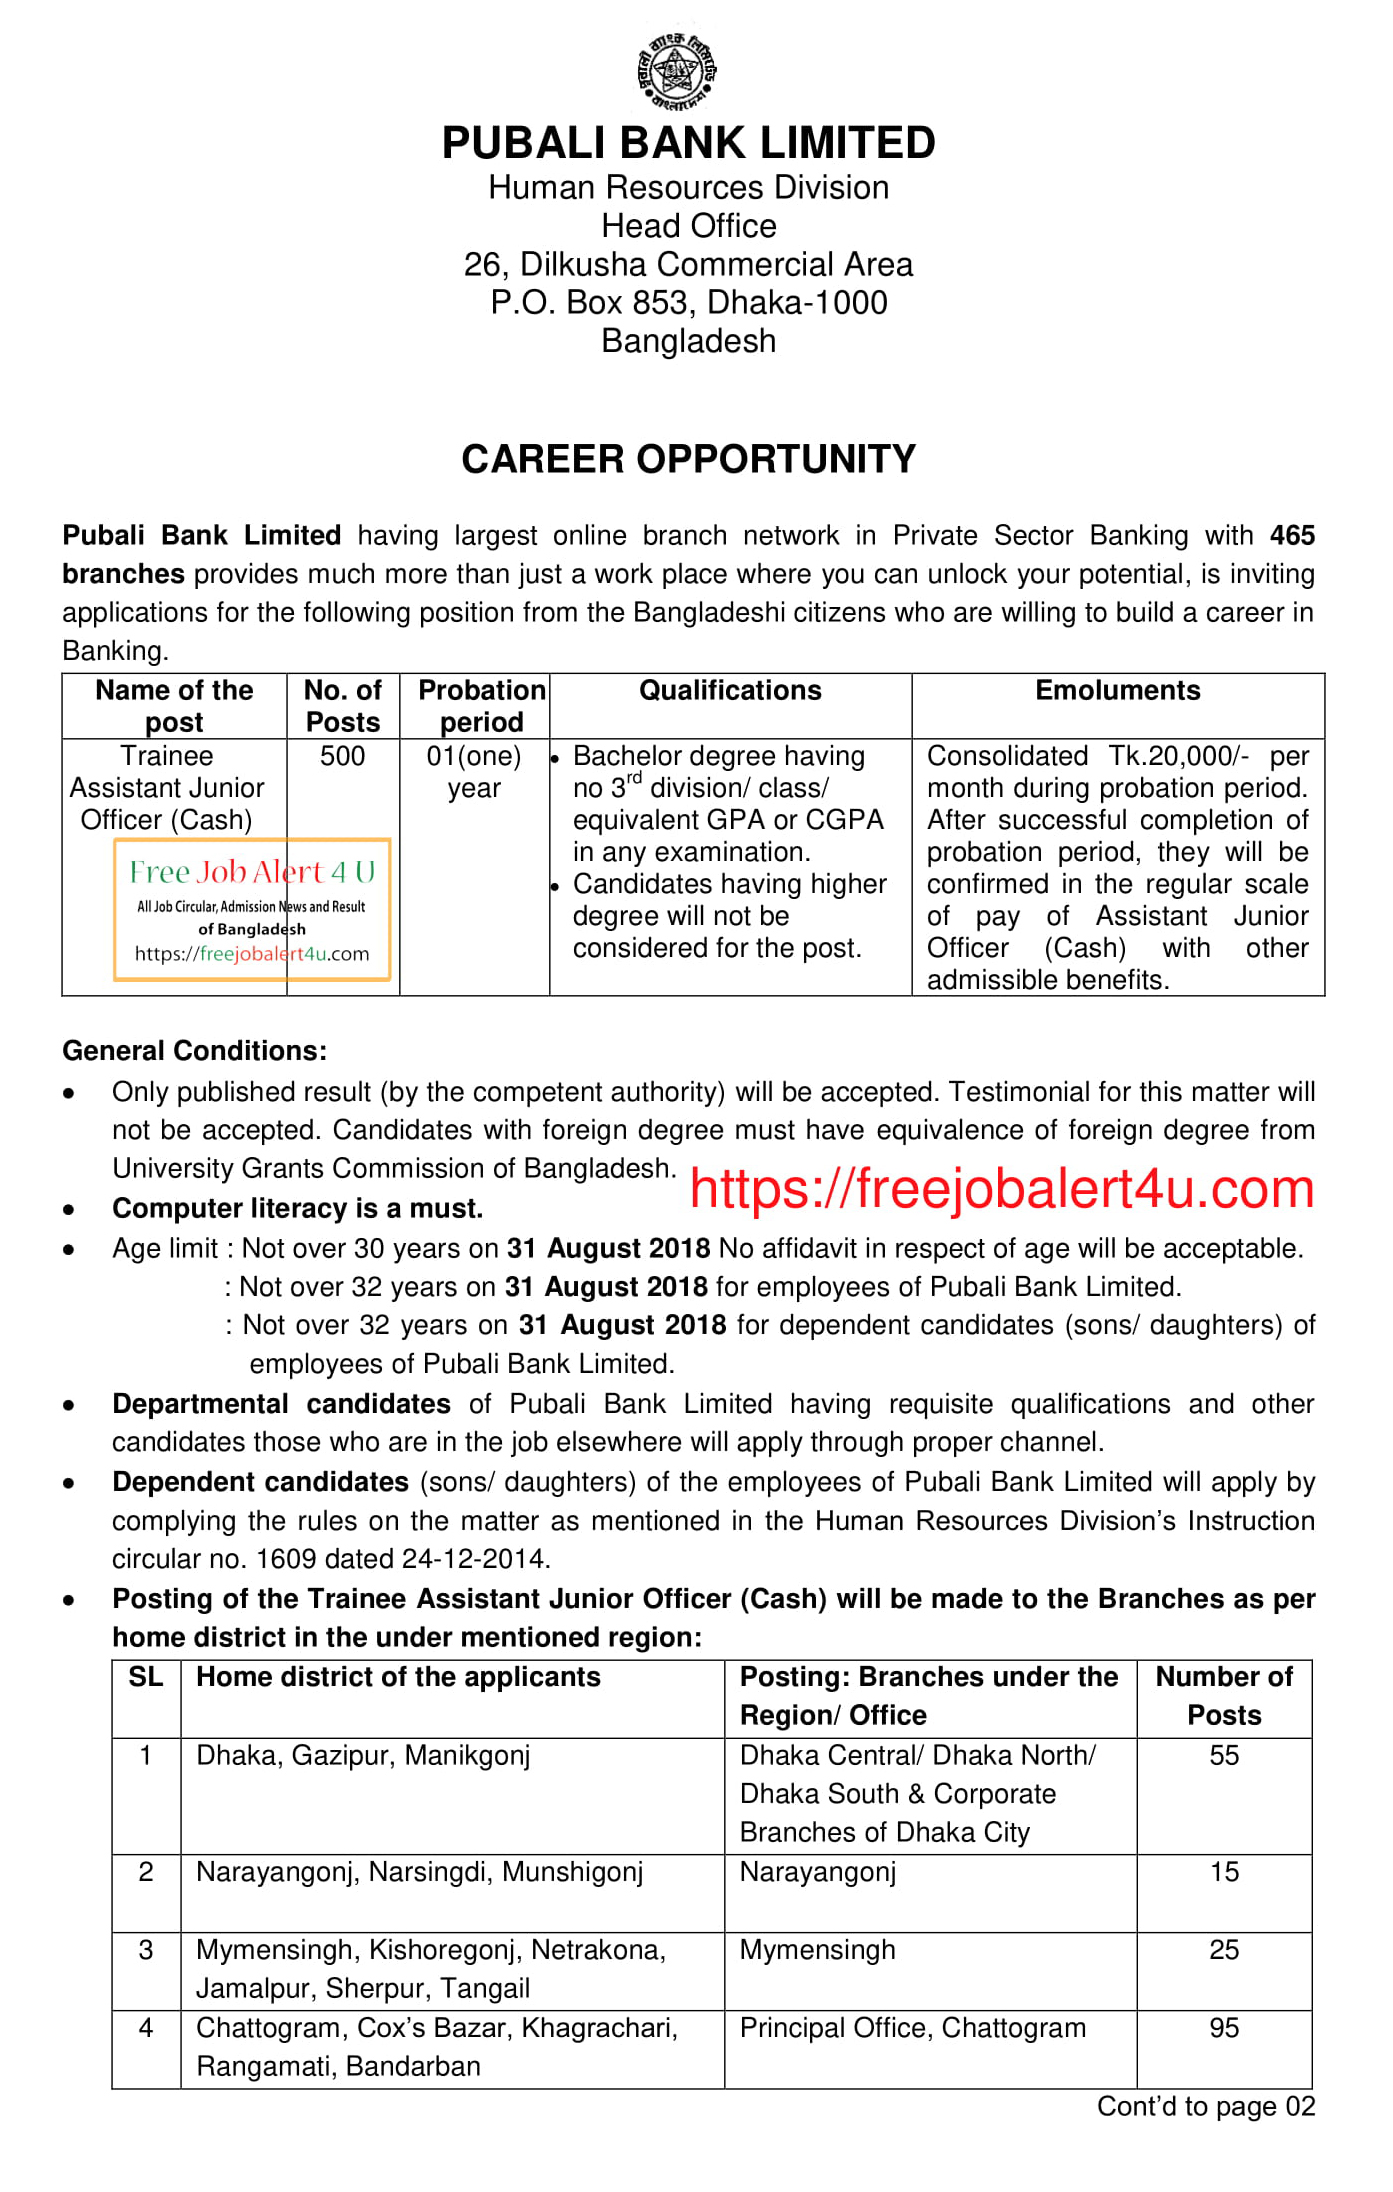 Pubali Bank Job Circular 2018 for the post of Trainee Assistant Junior Officer (Cash)